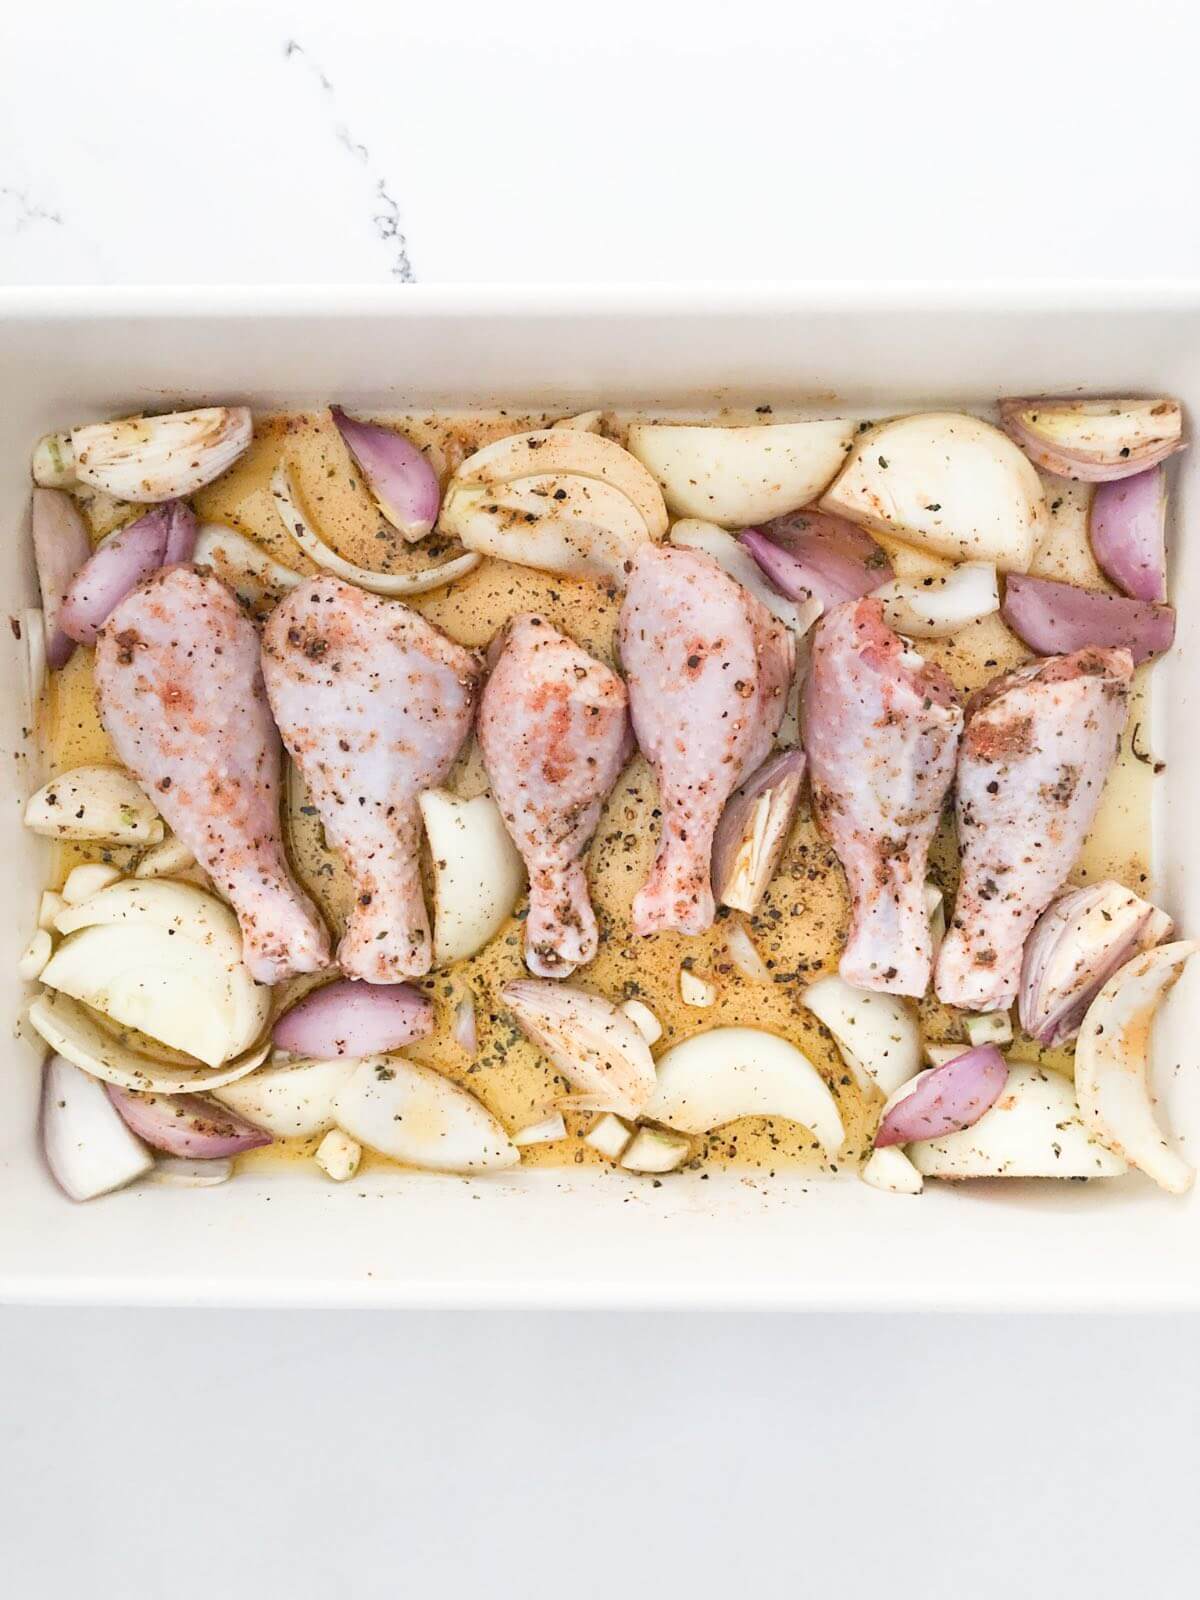 uncooked chicken drumsticks in olive oil, onions, garlic, and seasonings in a baking dish.